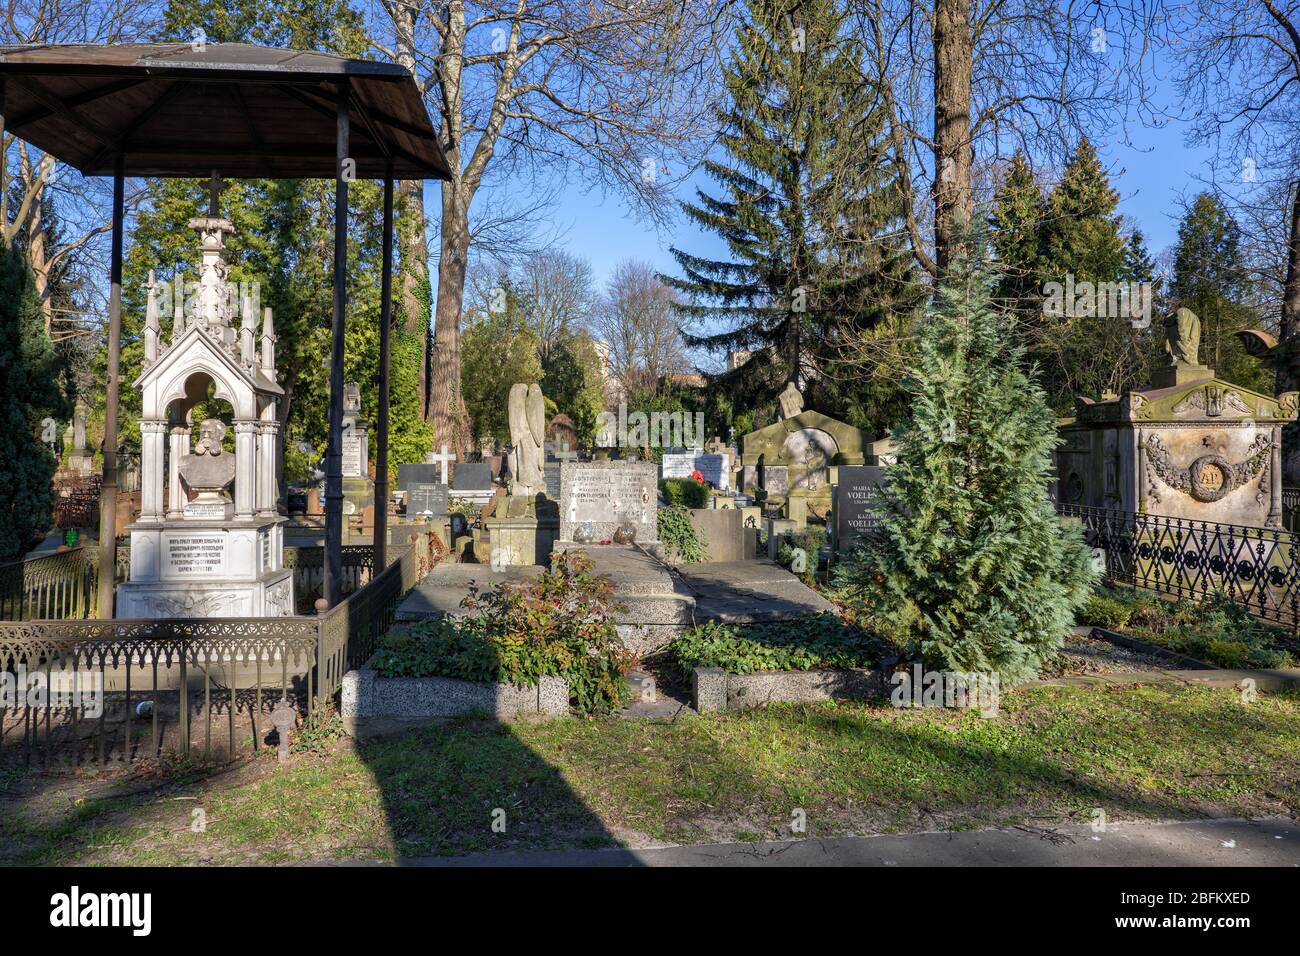 Warsaw, Poland - March, 2020: Evangelical Lutheran Cemetery of the Augsburg Confession, historic Lutheran Protestant necropolis established in 1792 Stock Photo